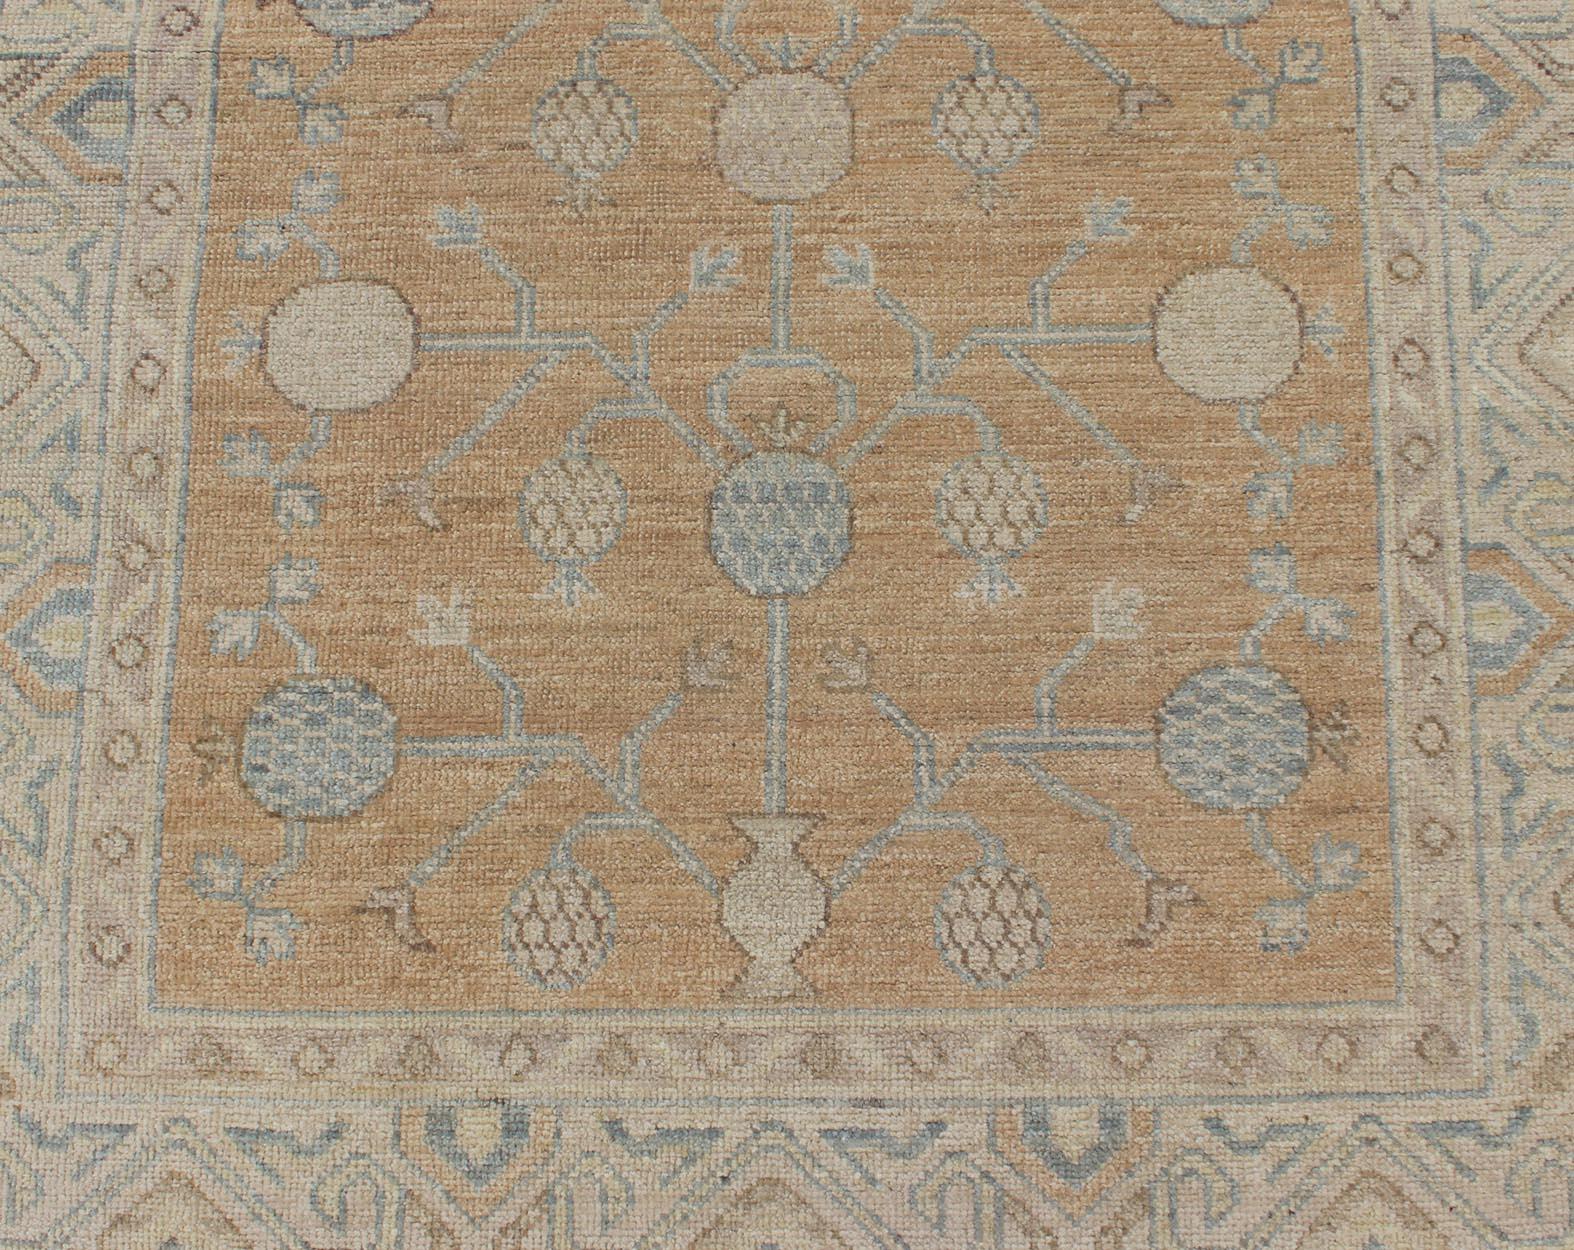 Contemporary Afghan Khotan Runner with All-Over Geometric-Pomegranate Pattern For Sale